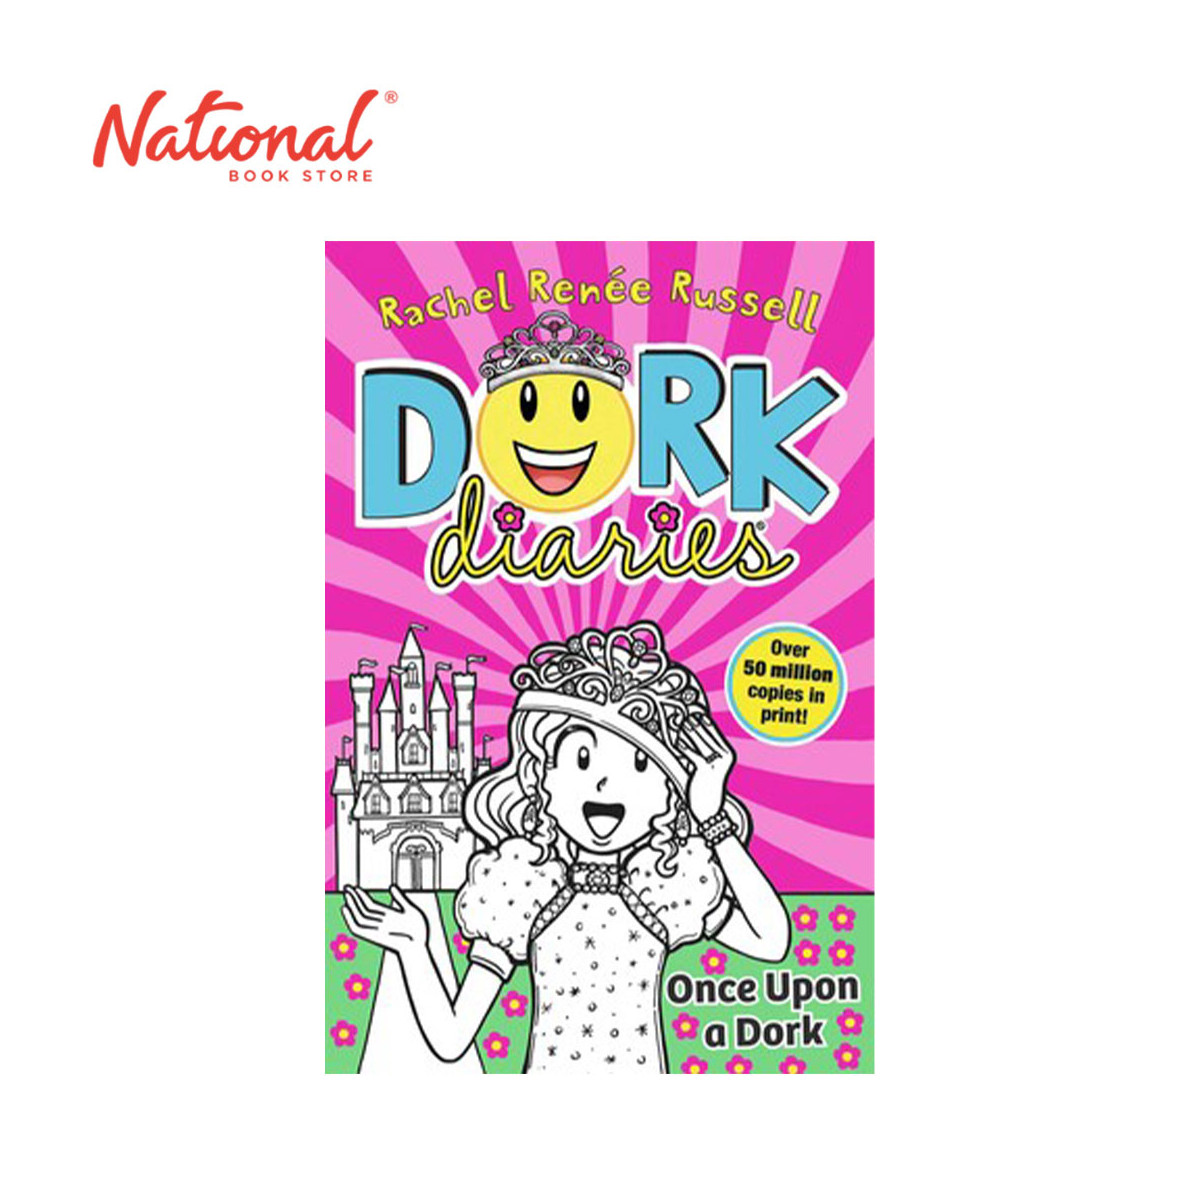 Dork Diaries 8: Once Upon A Dork UK New Cover By Rachel Renee Russell - Trade Paperback - Children's